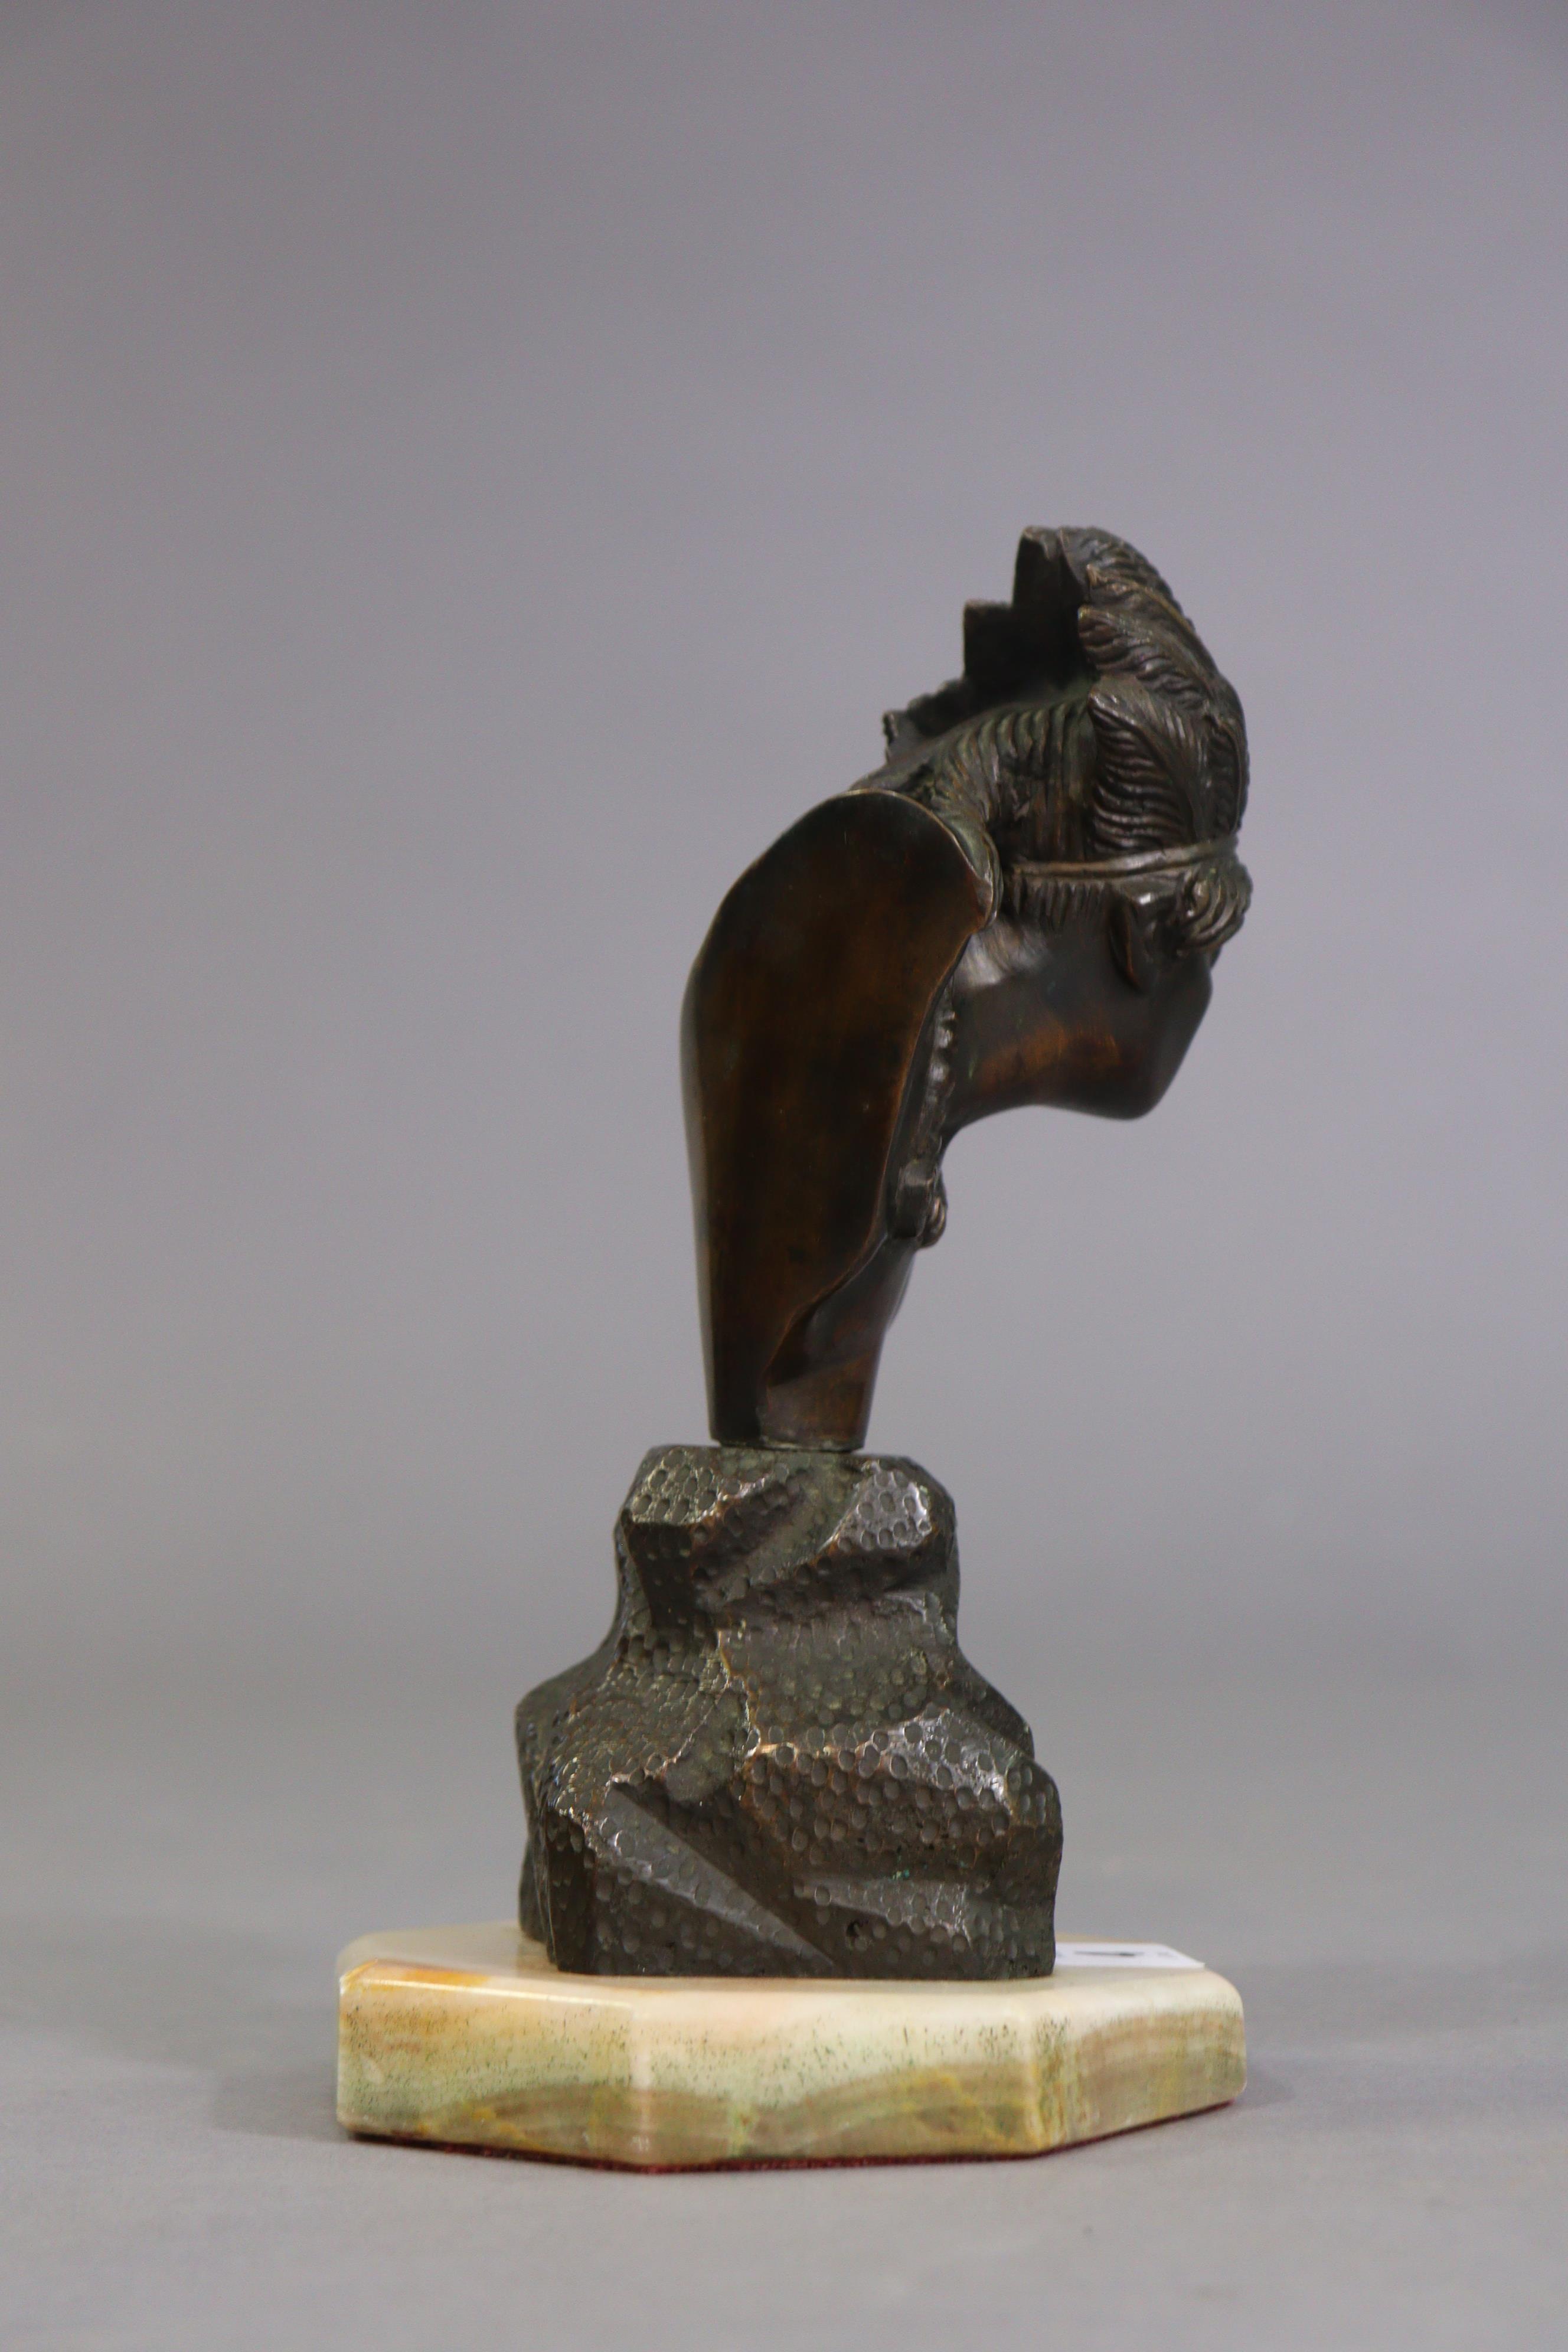 A bronzed Indian chief’s bust sculpture mounted on an onyx octagonal plinth, 22cm high. - Image 5 of 6